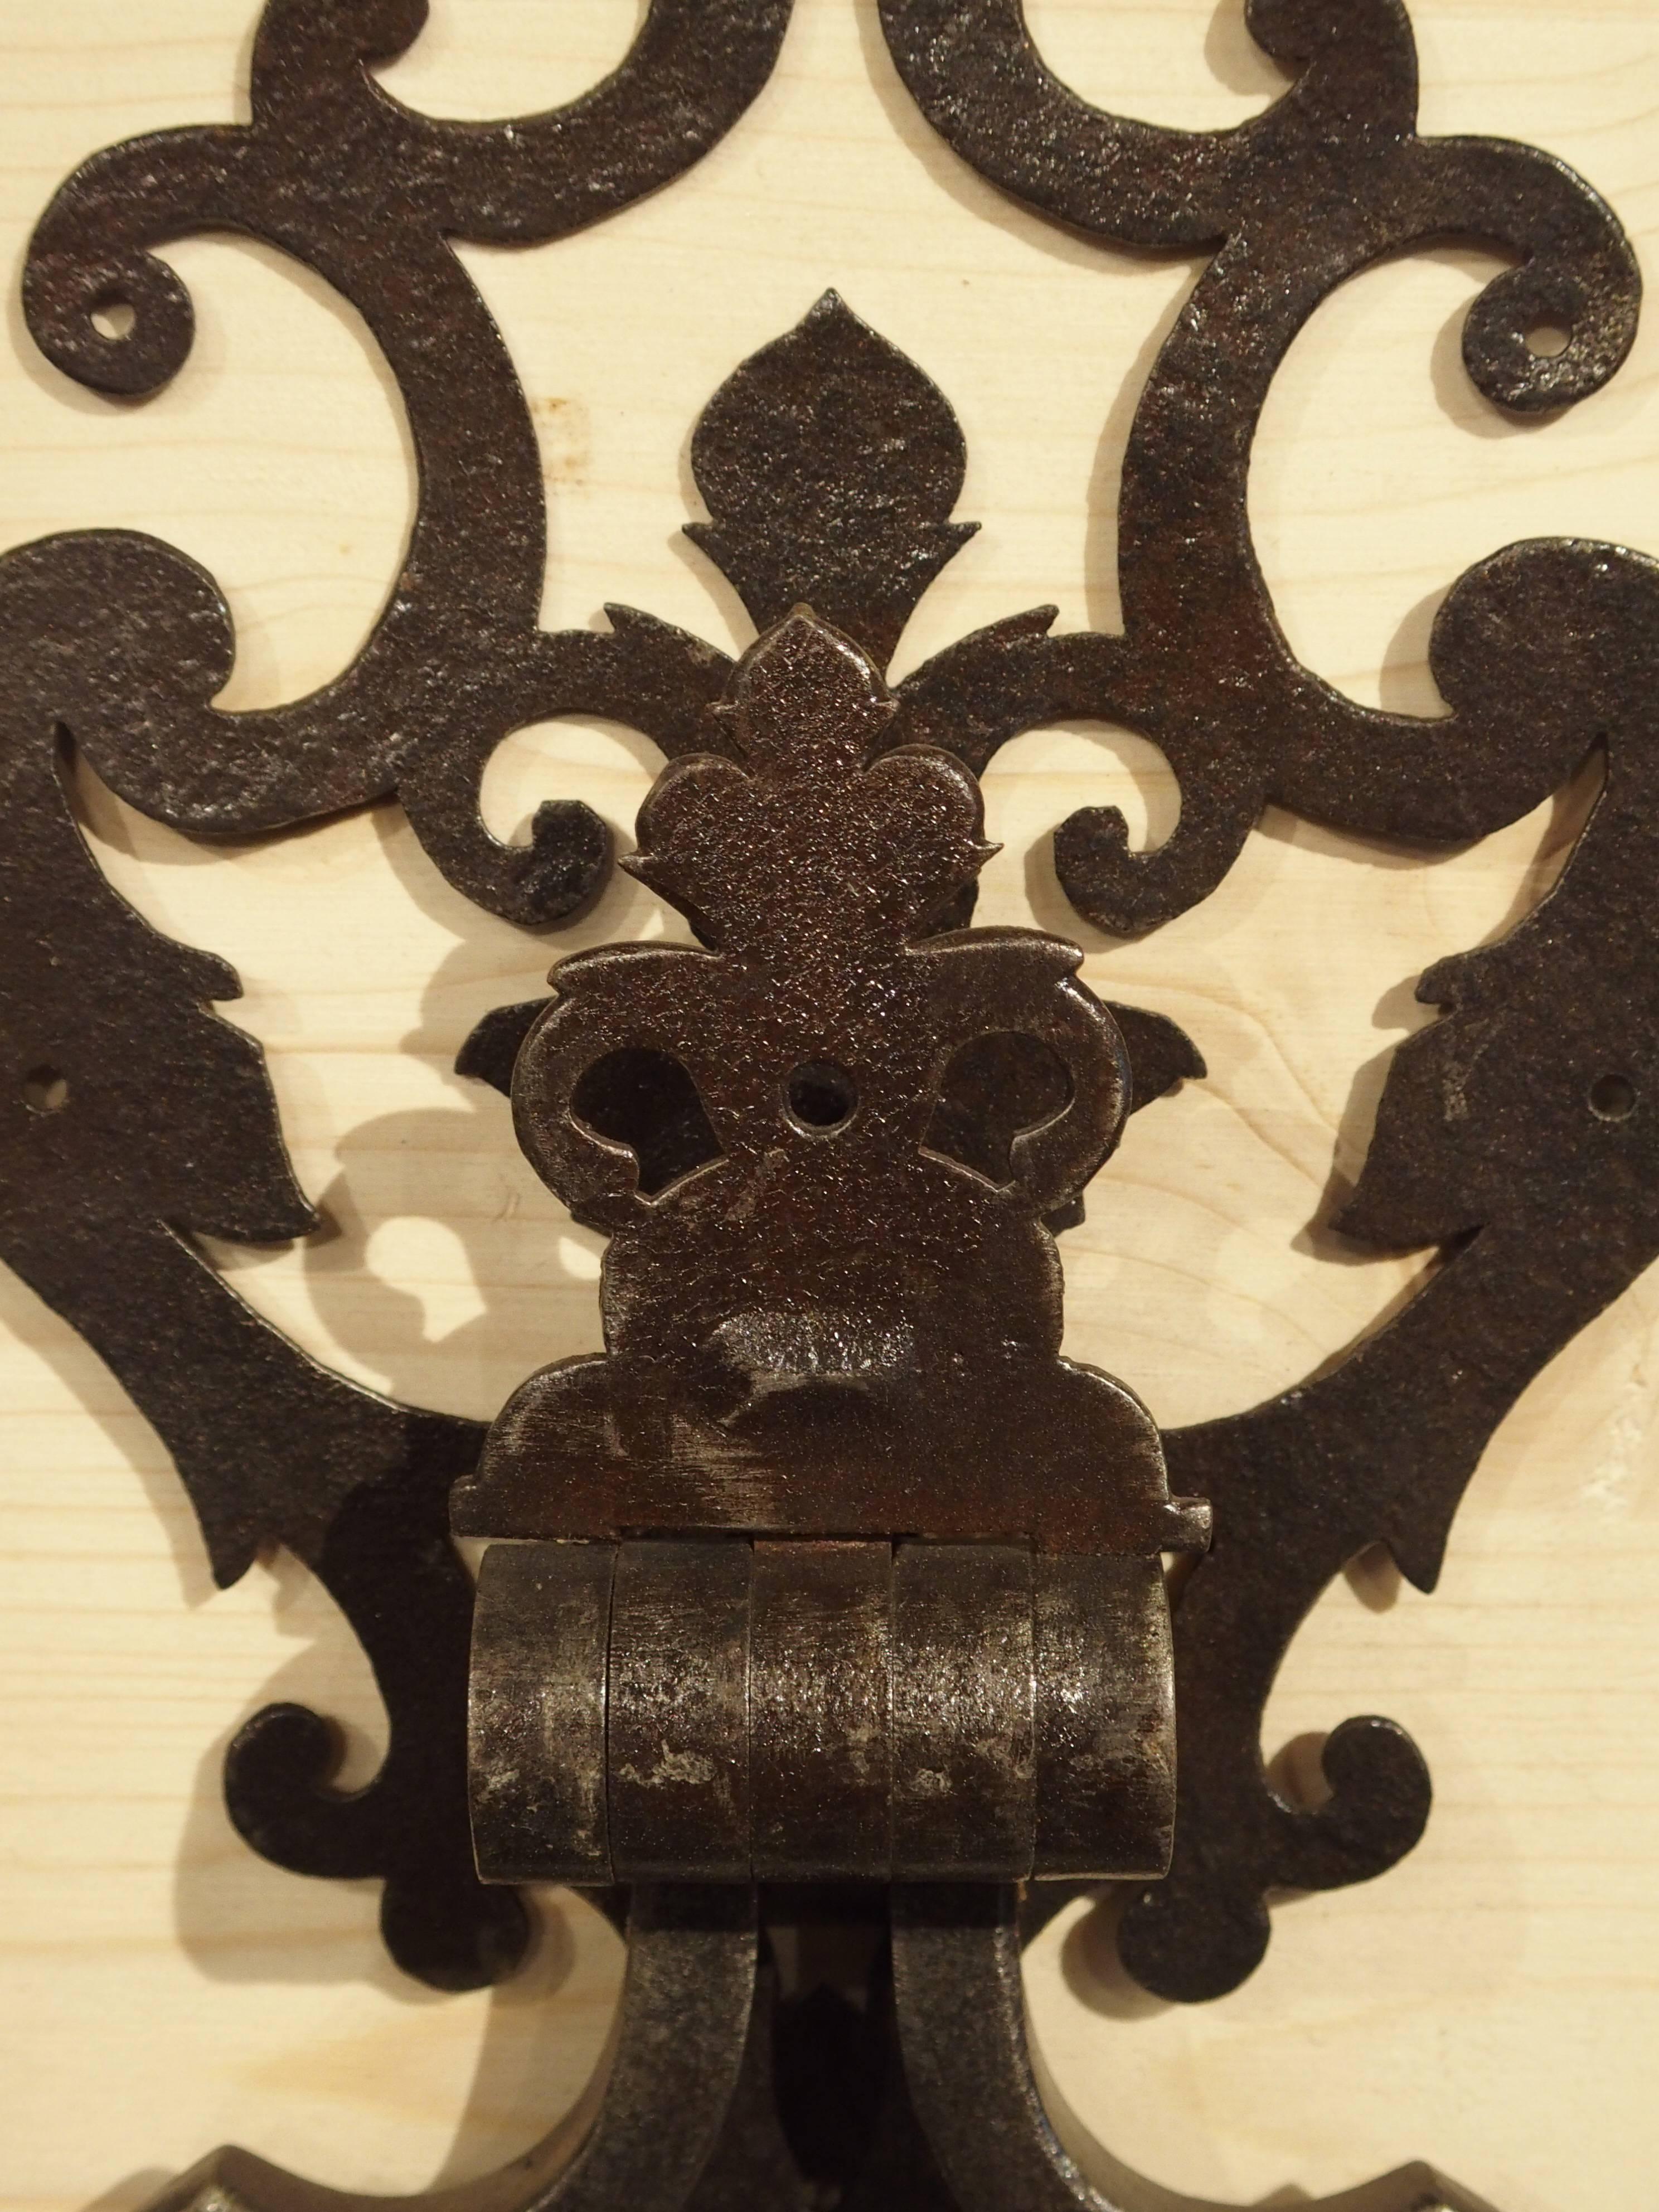 This iron door knocker is modeled from an 18th century door knocker found on a door at a chateau in the Luberon area of Provence France. This knocker is beautifully cut with different stylized versions of the fleur-de-lis on it. The door knocker